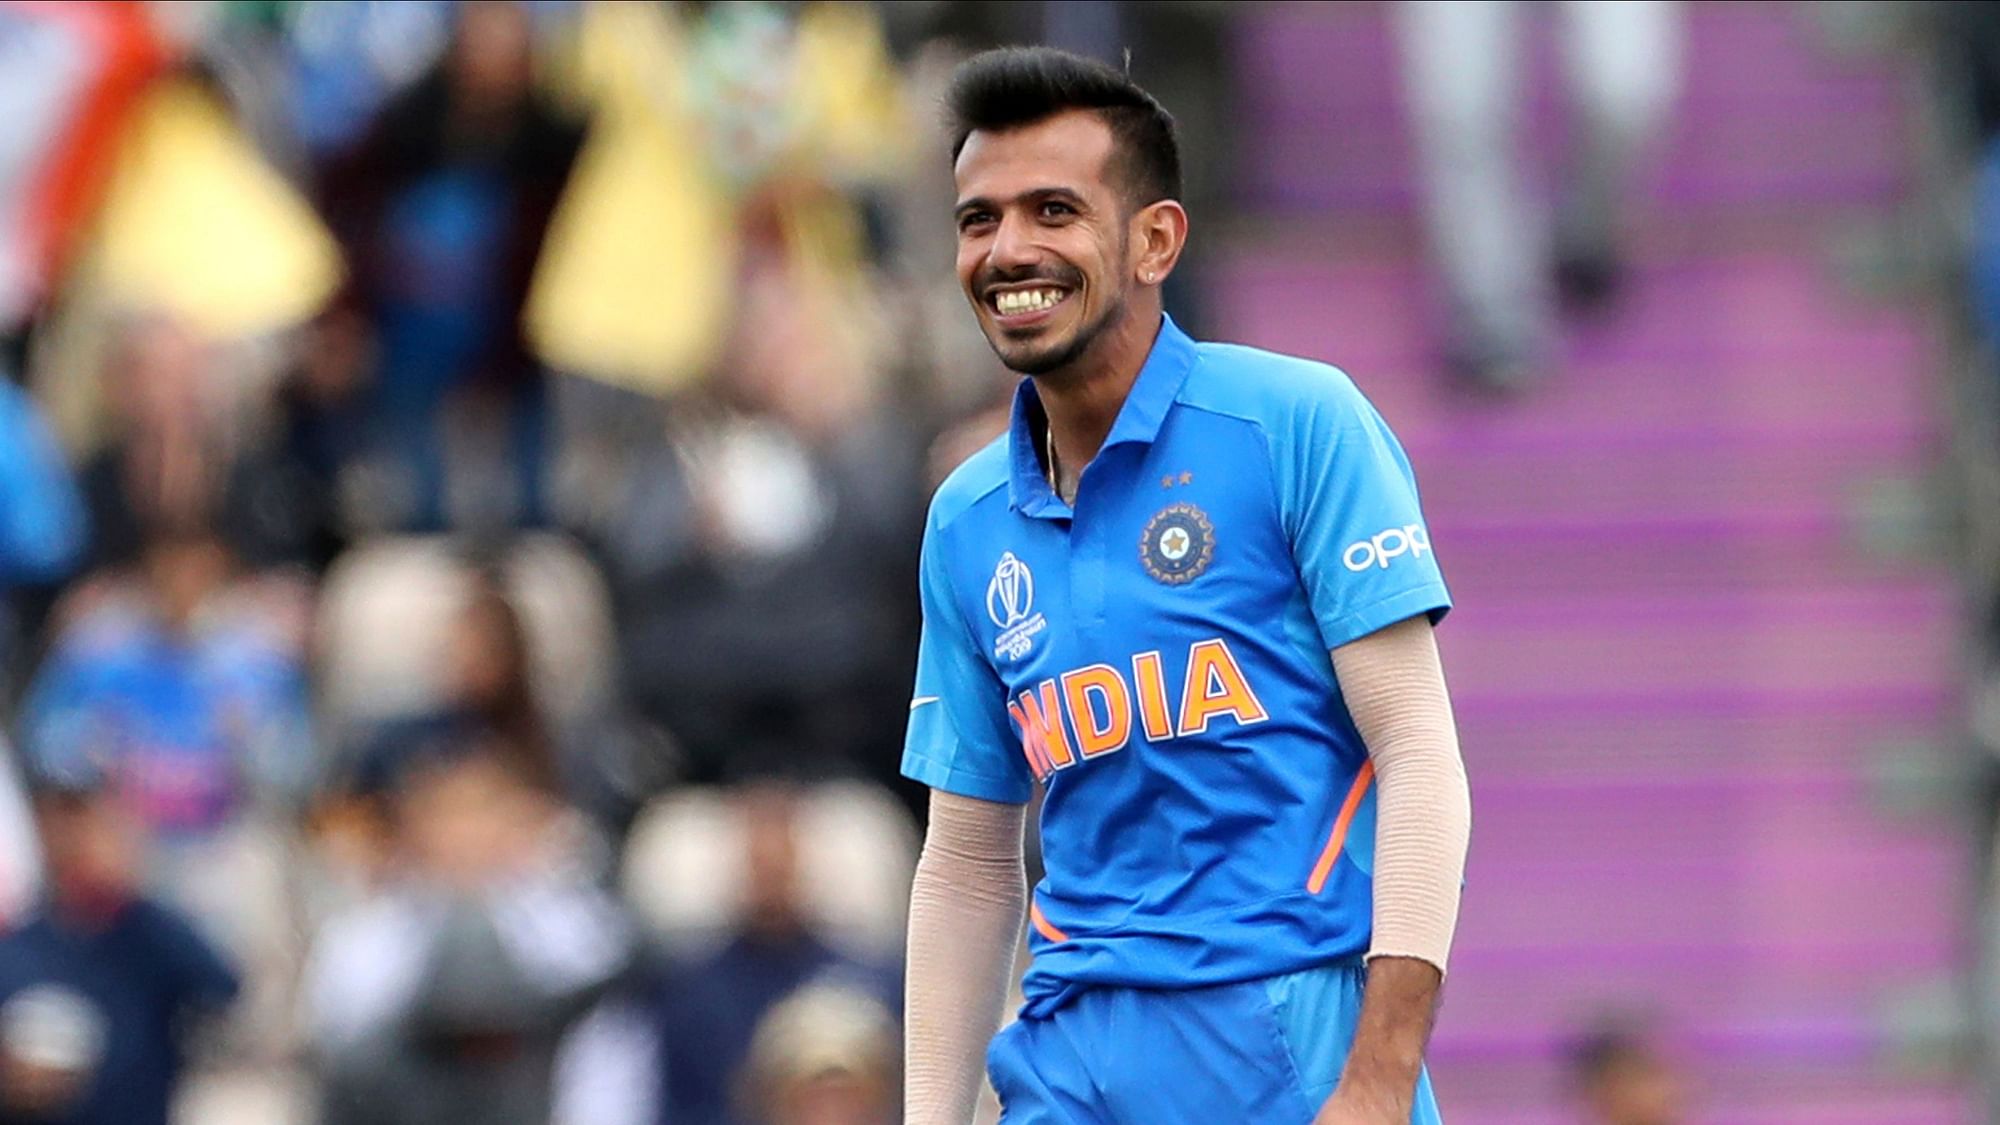 Yuzvendra Chahal returned with  4/51 from his 10 overs vs South Africa.